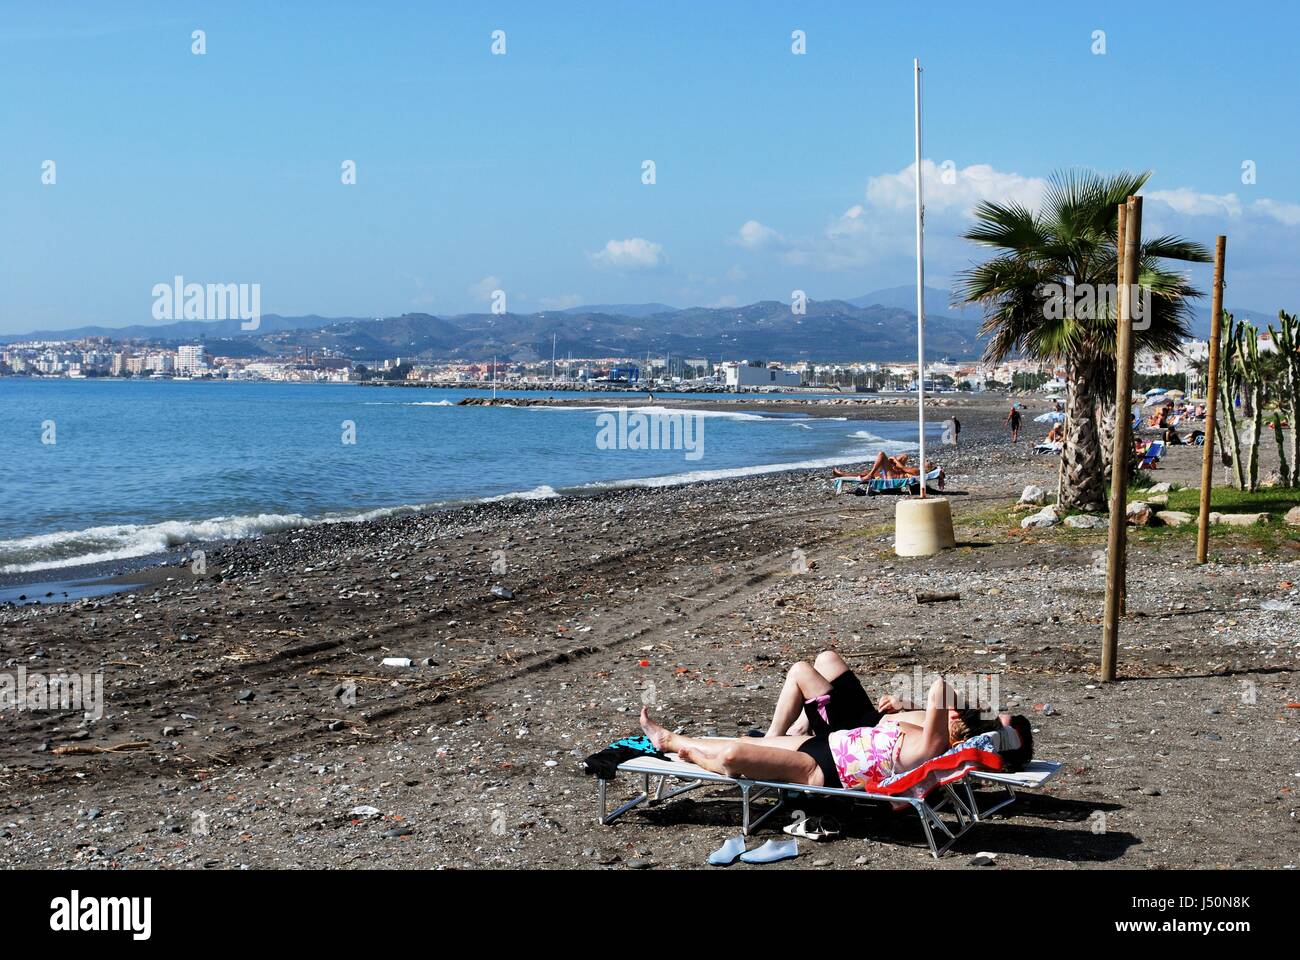 Tourists relaxing on the pebble beach with views along the coastline, Lagos, Malaga Province, Andalusia, Spain, Western Europe. Stock Photo